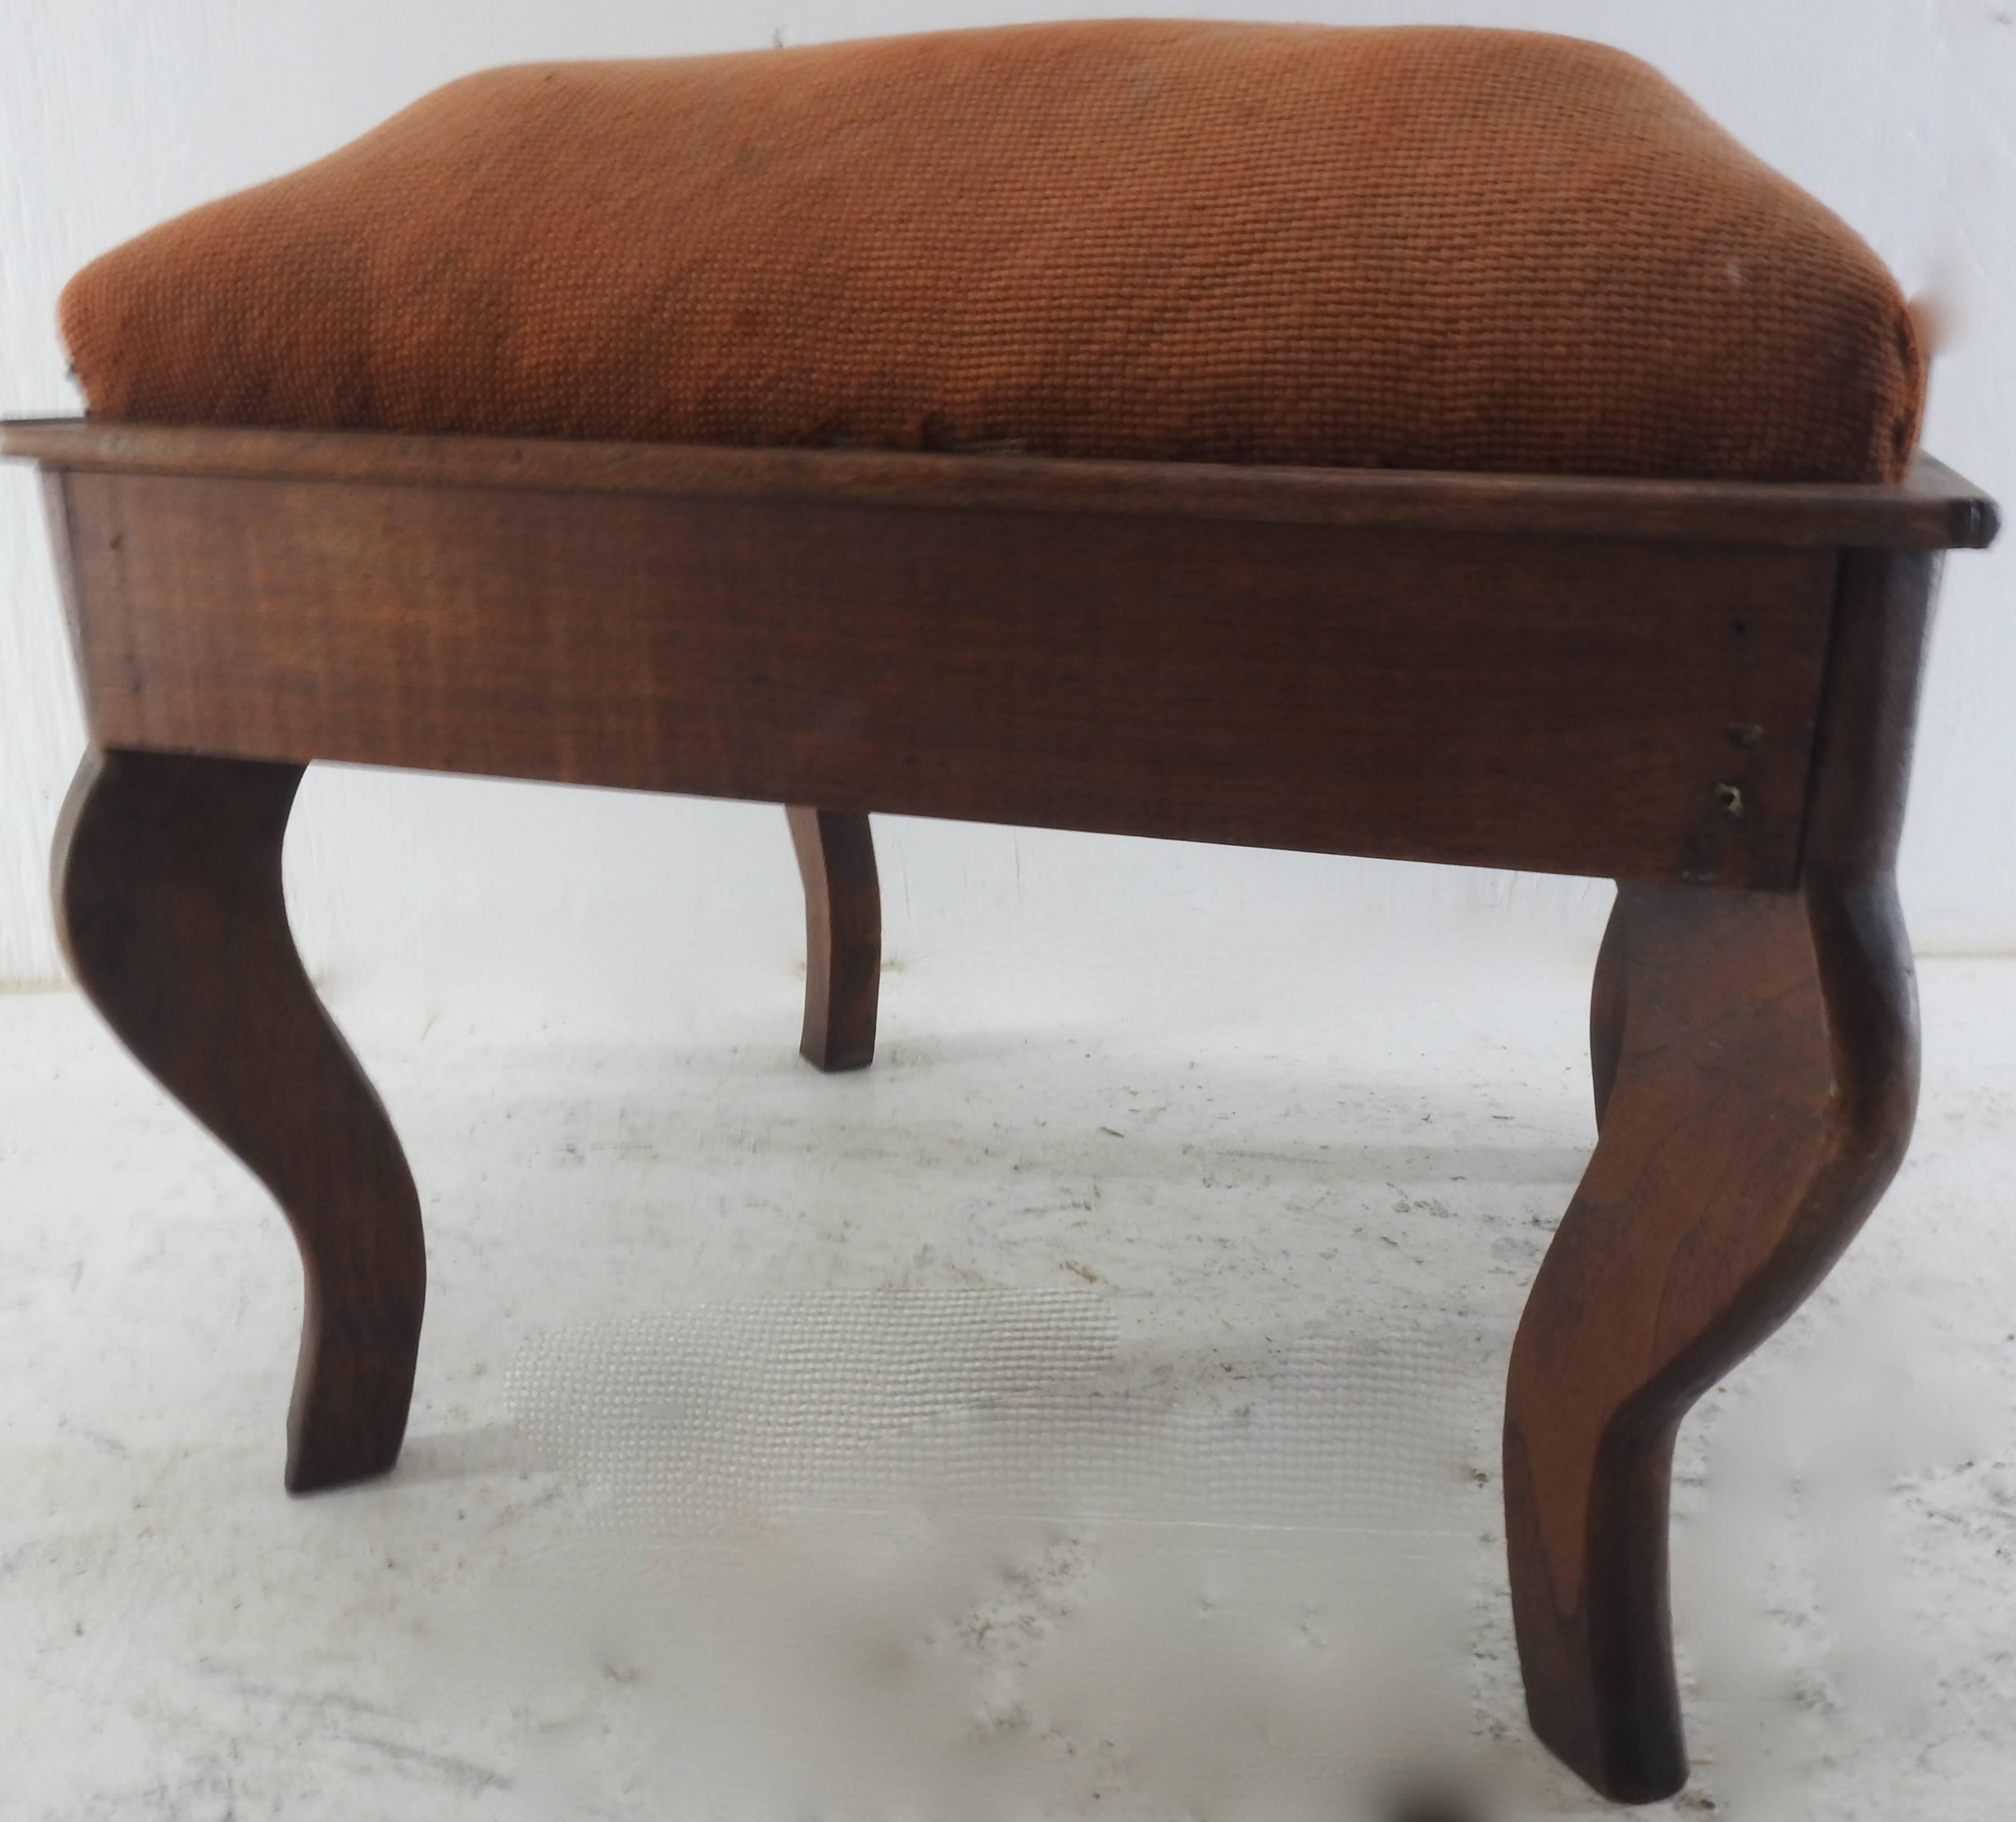 Thread Late 19th Century French Needlepoint Foot Stool For Sale